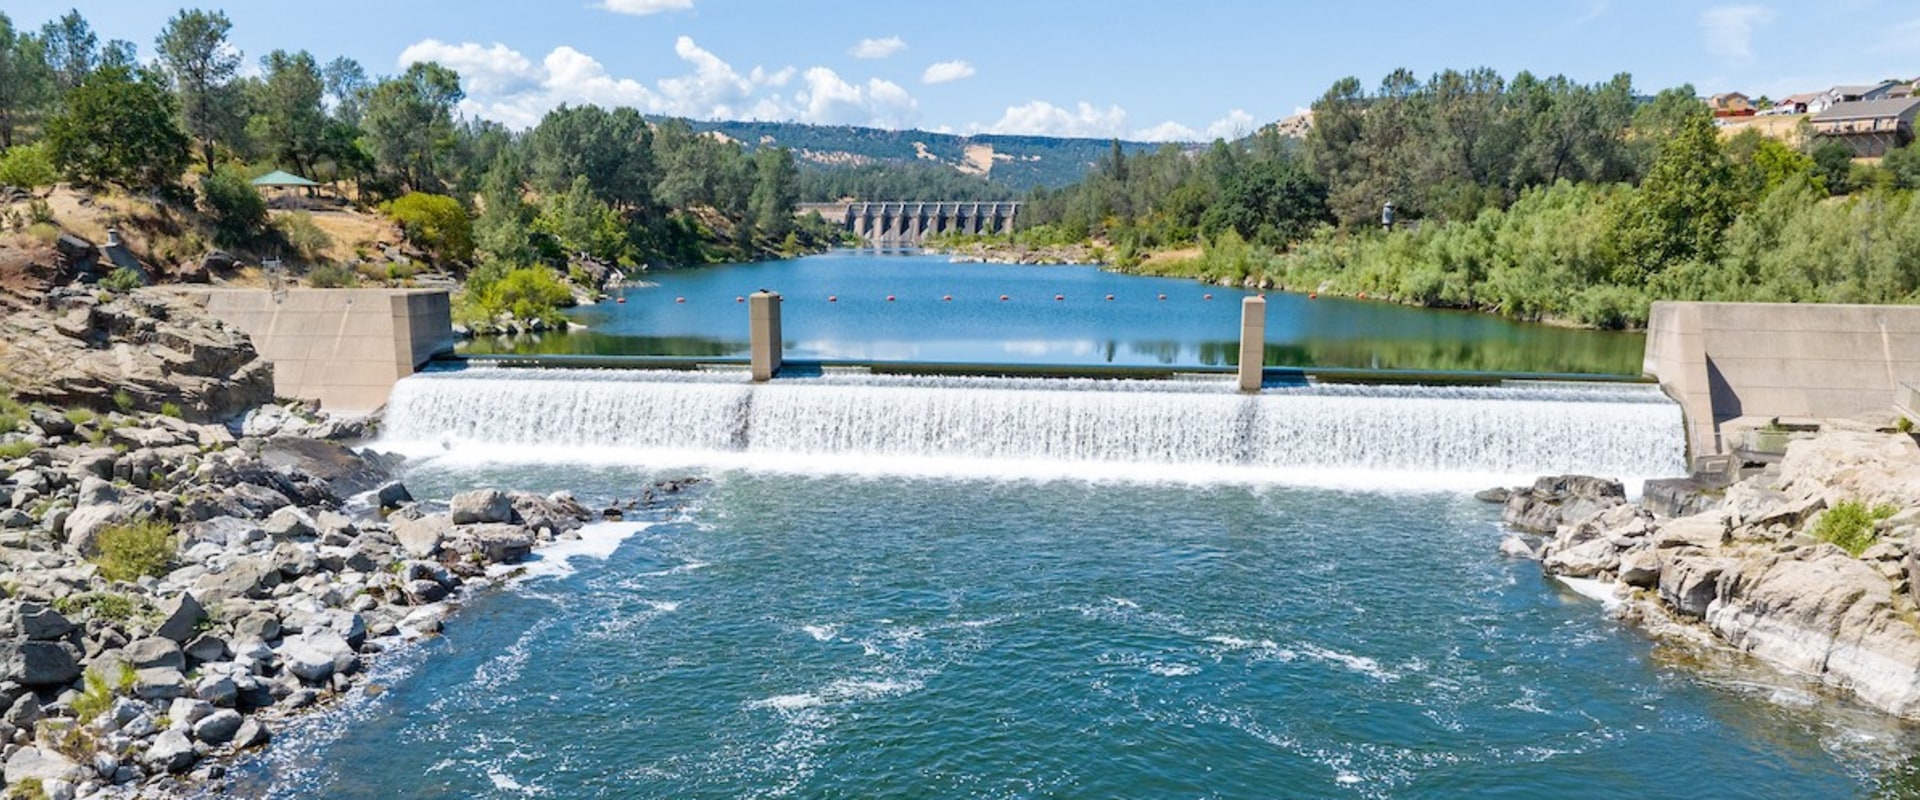 Water Testing and Monitoring Efforts for the Feather River Stewardship Coalition